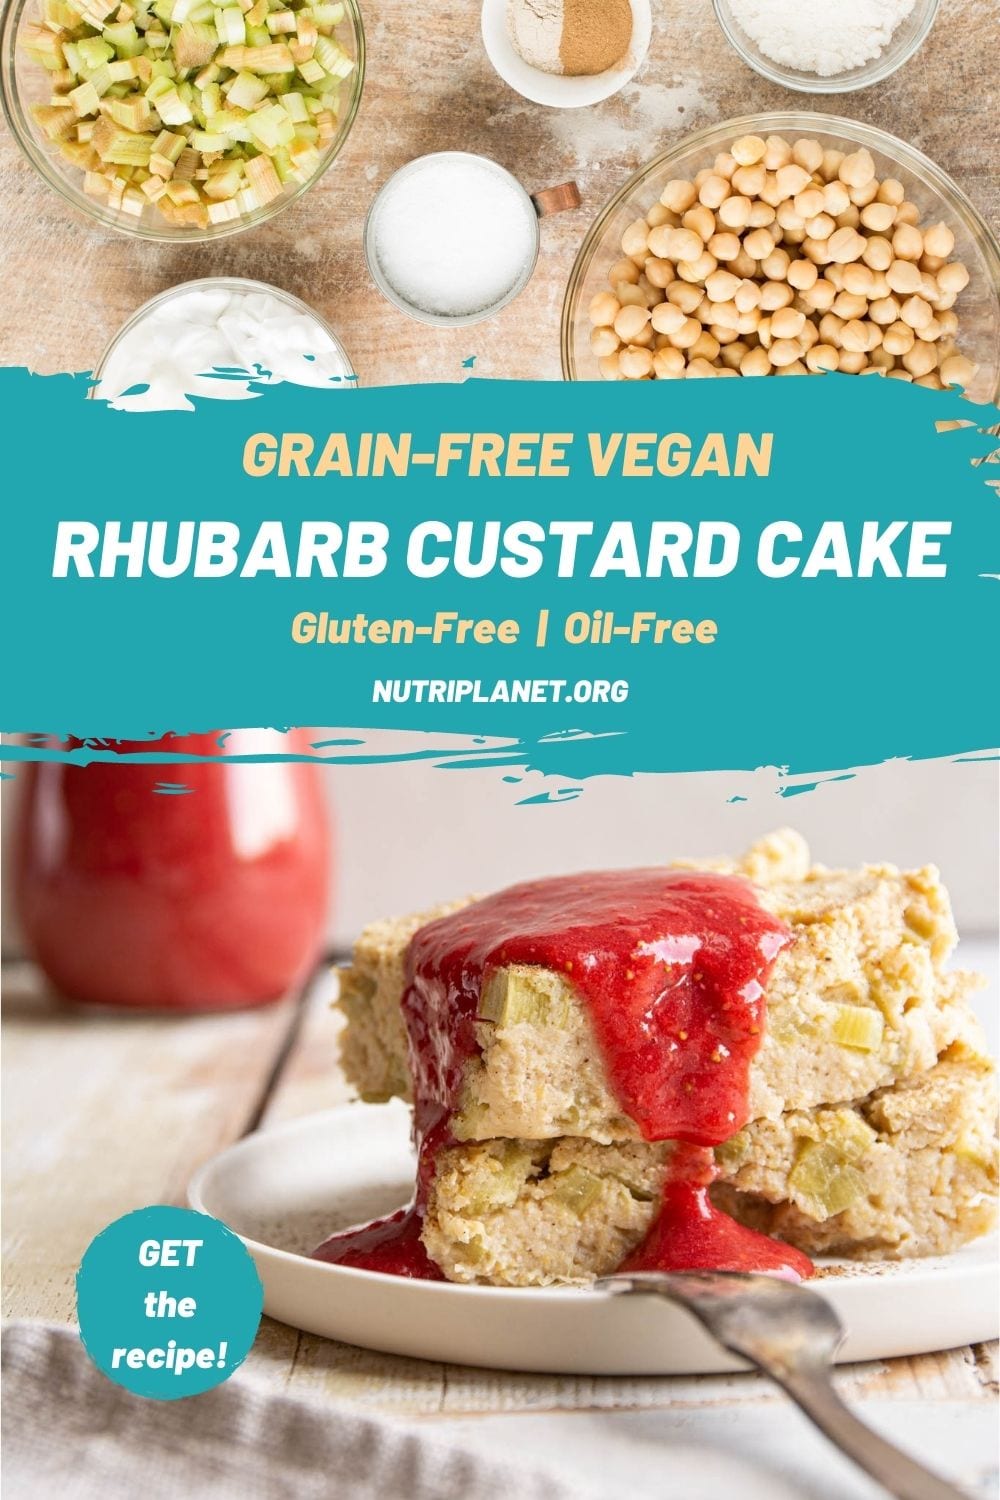 Oil-free and refined sugar free flourless vegan rhubarb custard cake. Refreshing sourness of rhubarb combined with creamy custard of chickpeas and coconut in a healthy way.